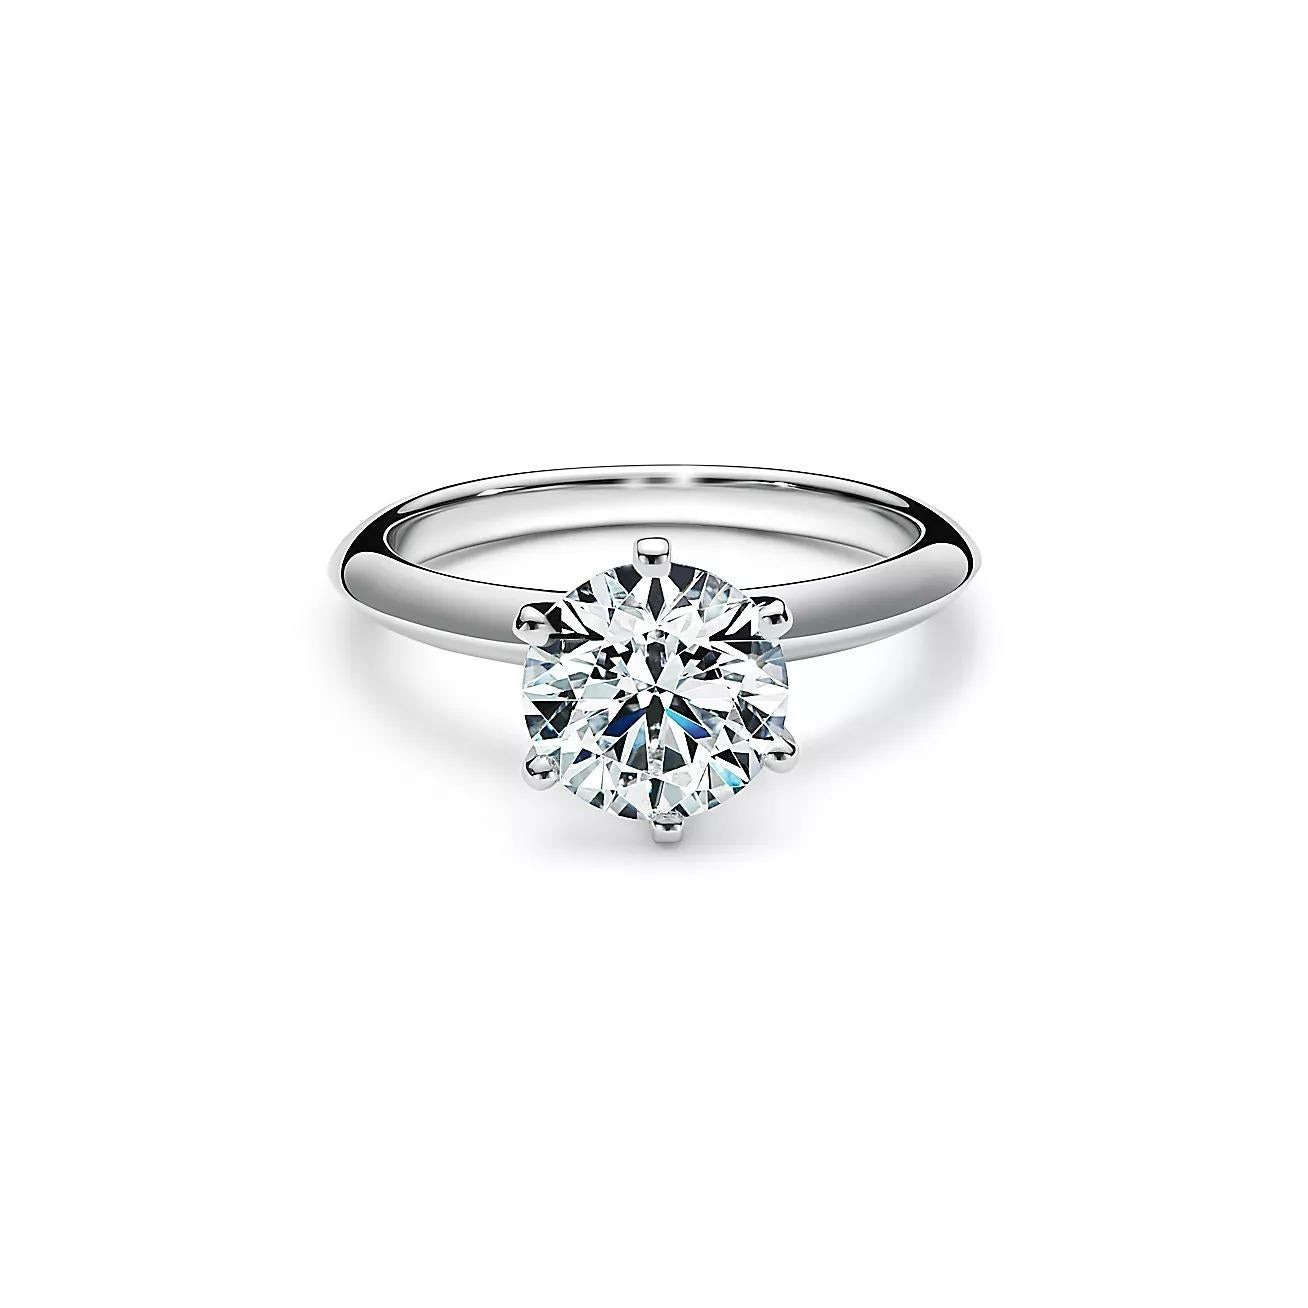 A true masterpiece of design, the Tiffany Setting is the most famous engagement ring in the world. Designed to perfection, the six-prong setting 